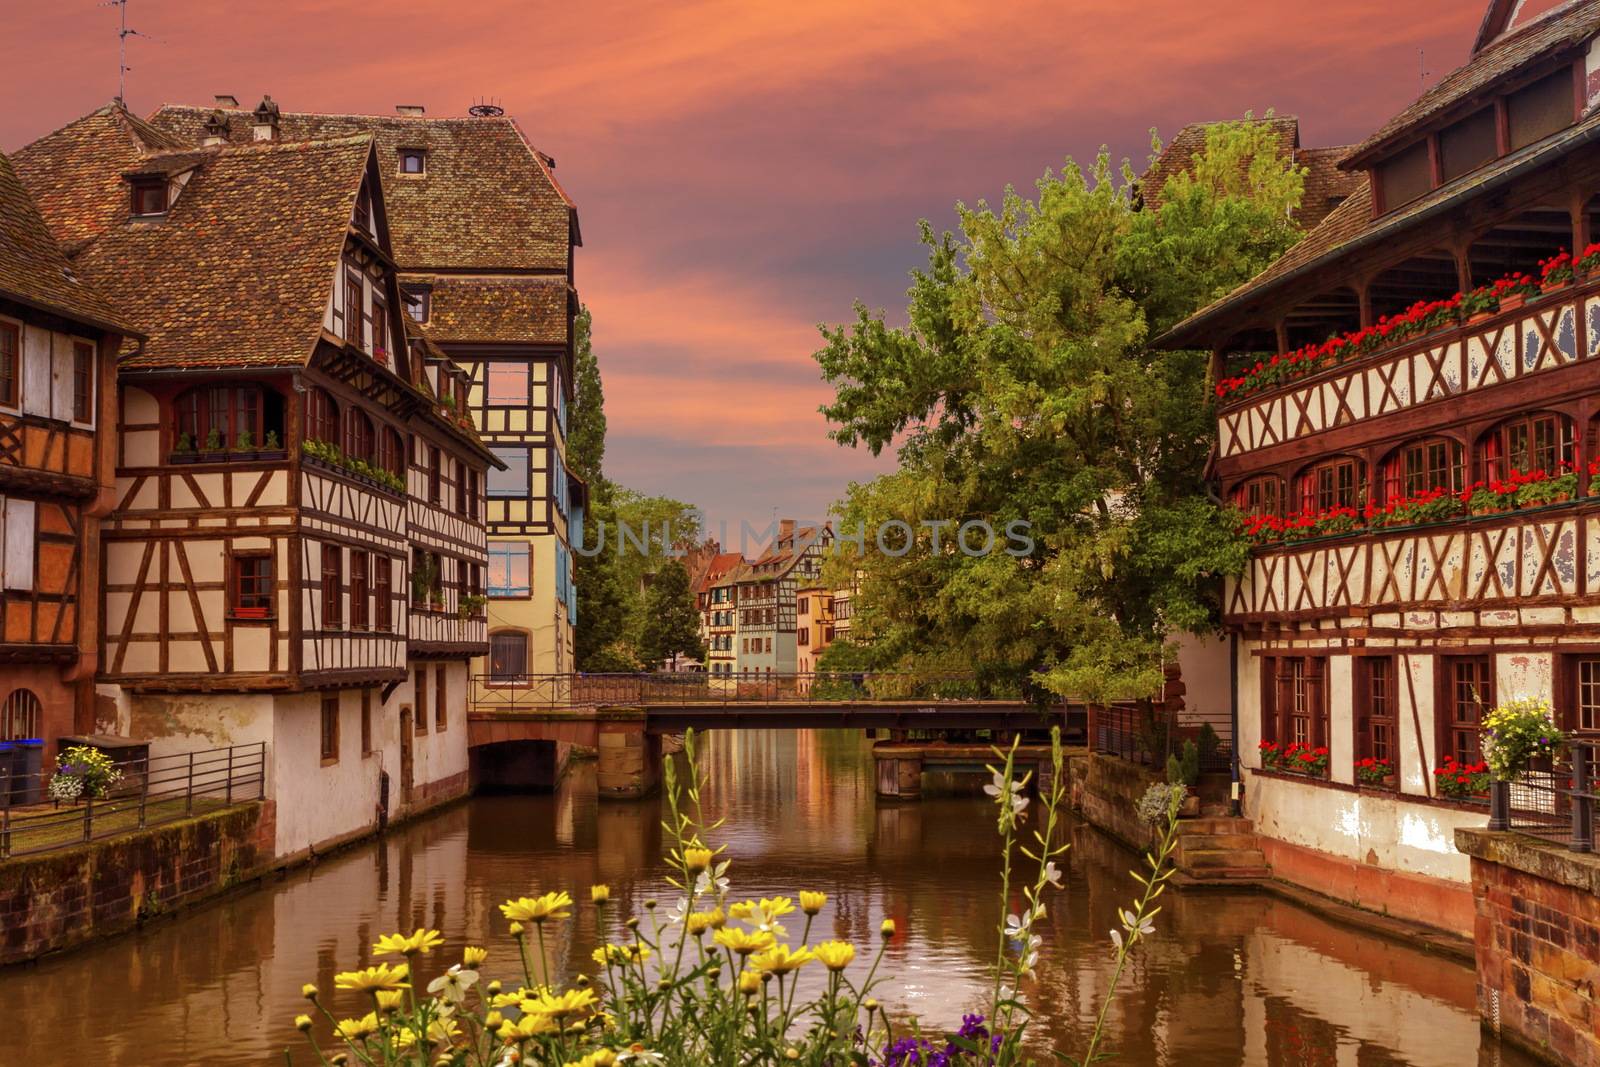 Traditional Alsatian half-timbered houses in Petite France, Strasbourg, France